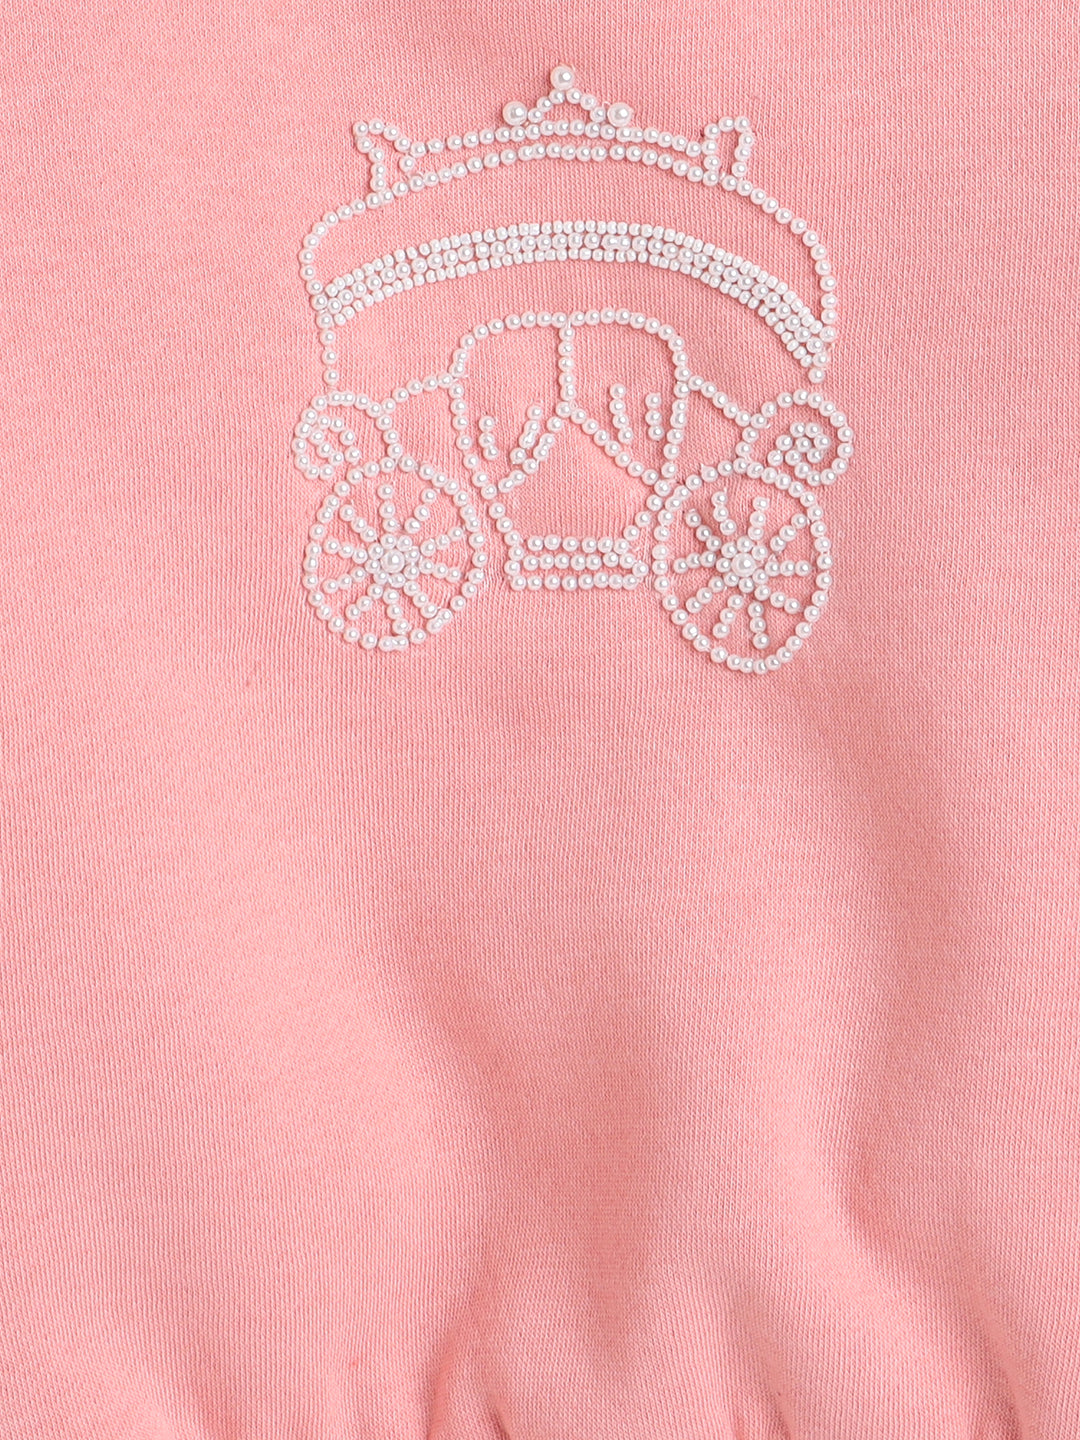 Knitting Doodles Kids' Sweat Shirt with Warm Fleece and Pretty Carriage in Bead Work- Peach